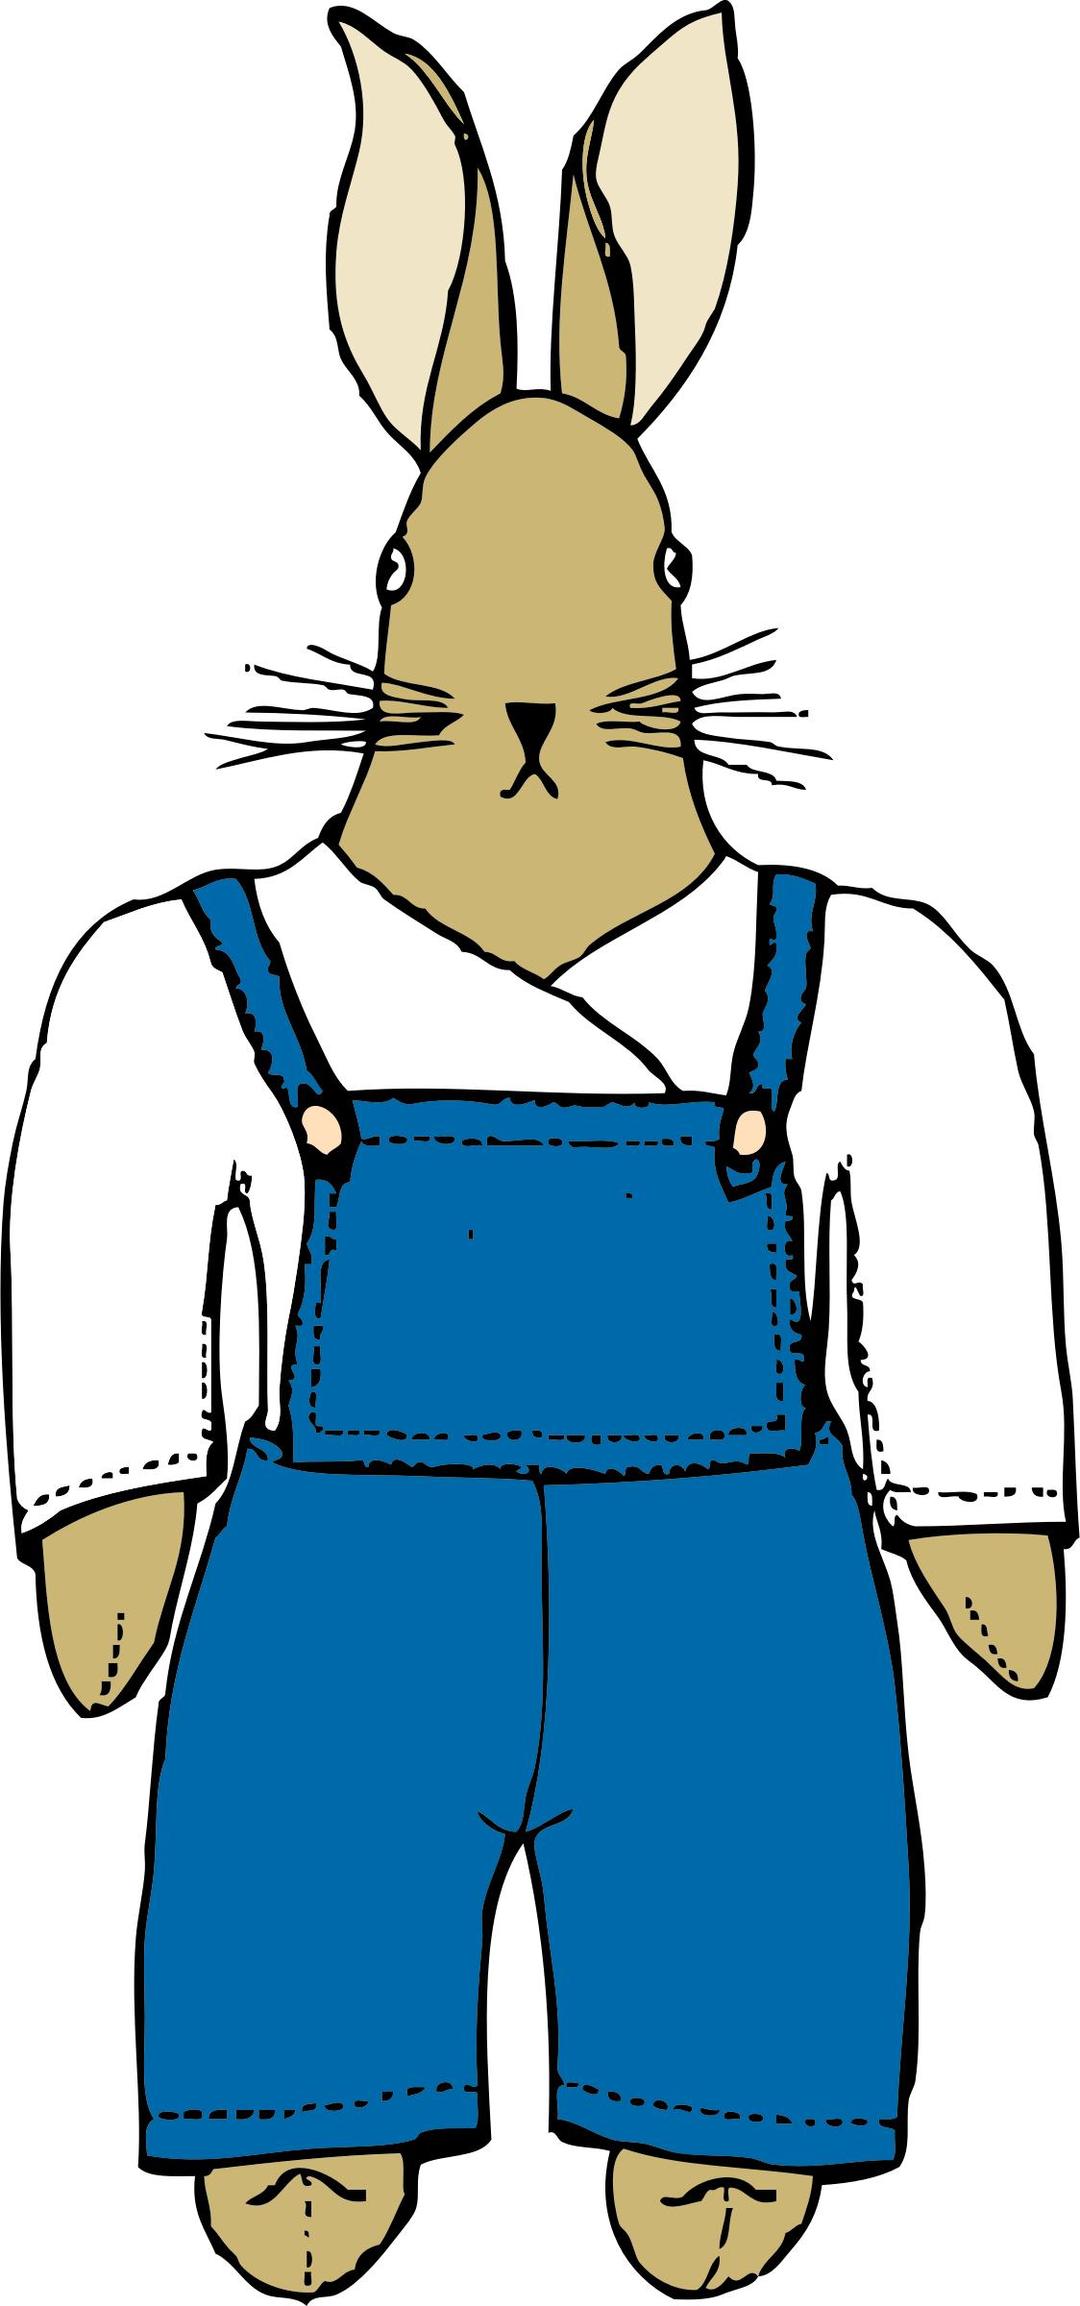 bunny in overalls front view png transparent